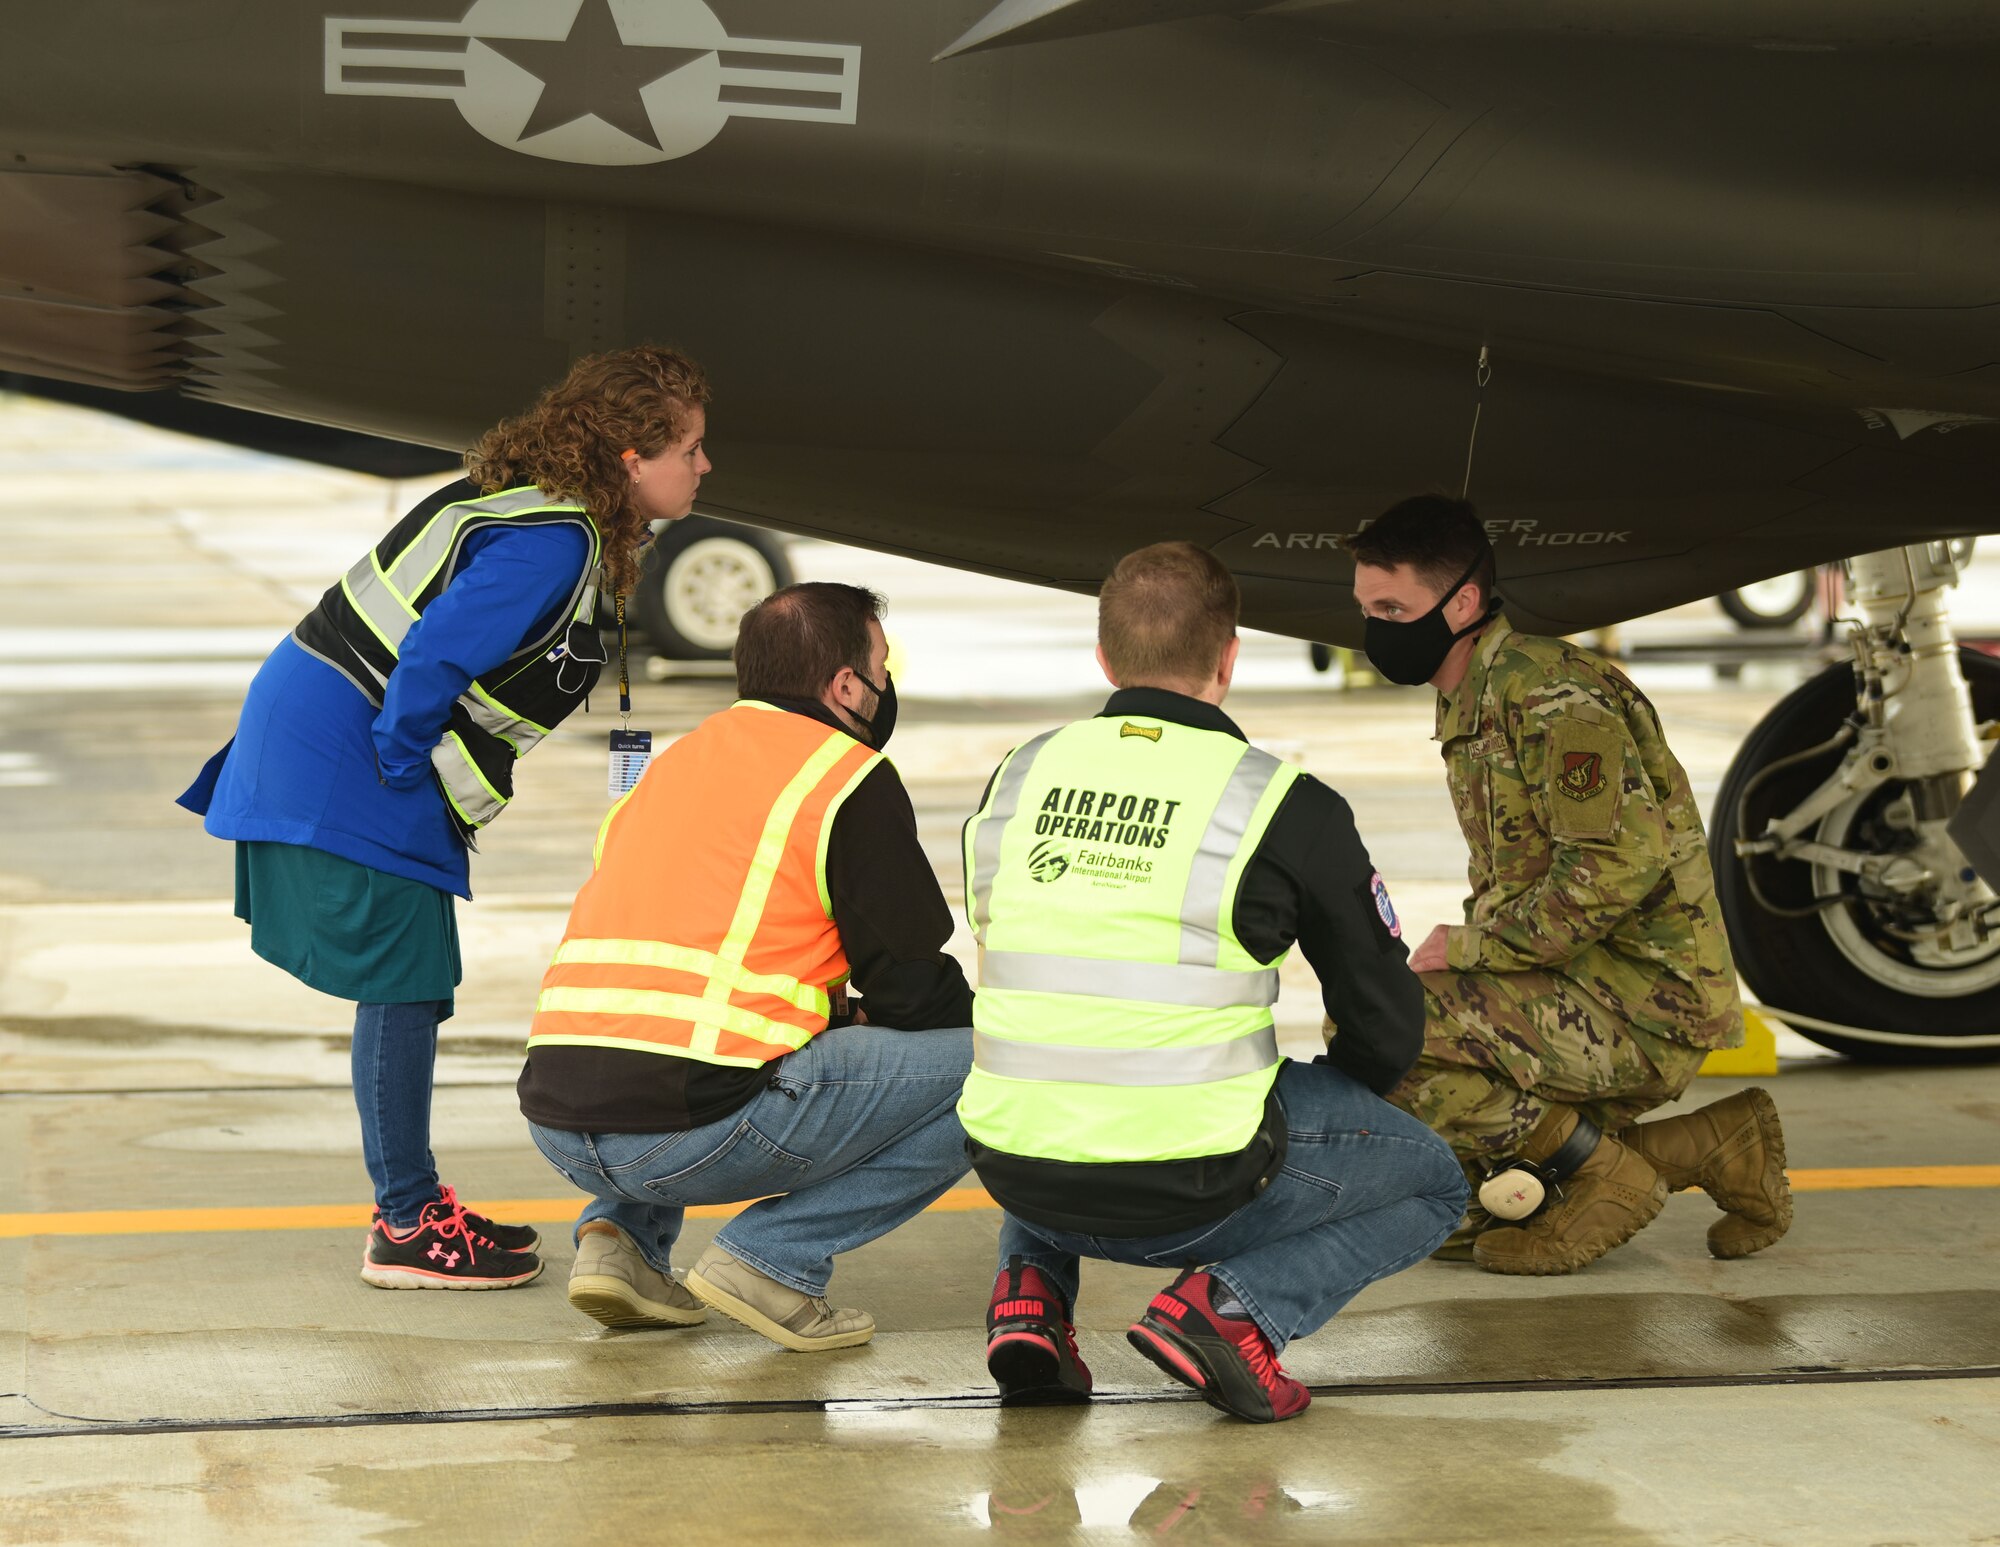 U.S. Air Force Tech. Sgt. Theodore Crowley, a 356th Aircraft Maintenance Unit F-35A Lightning II crew chief, explains some basic features and functions of the F-35A to representatives from Omni Logistics Inc. at the Fairbanks International Airport, June 24, 2020.